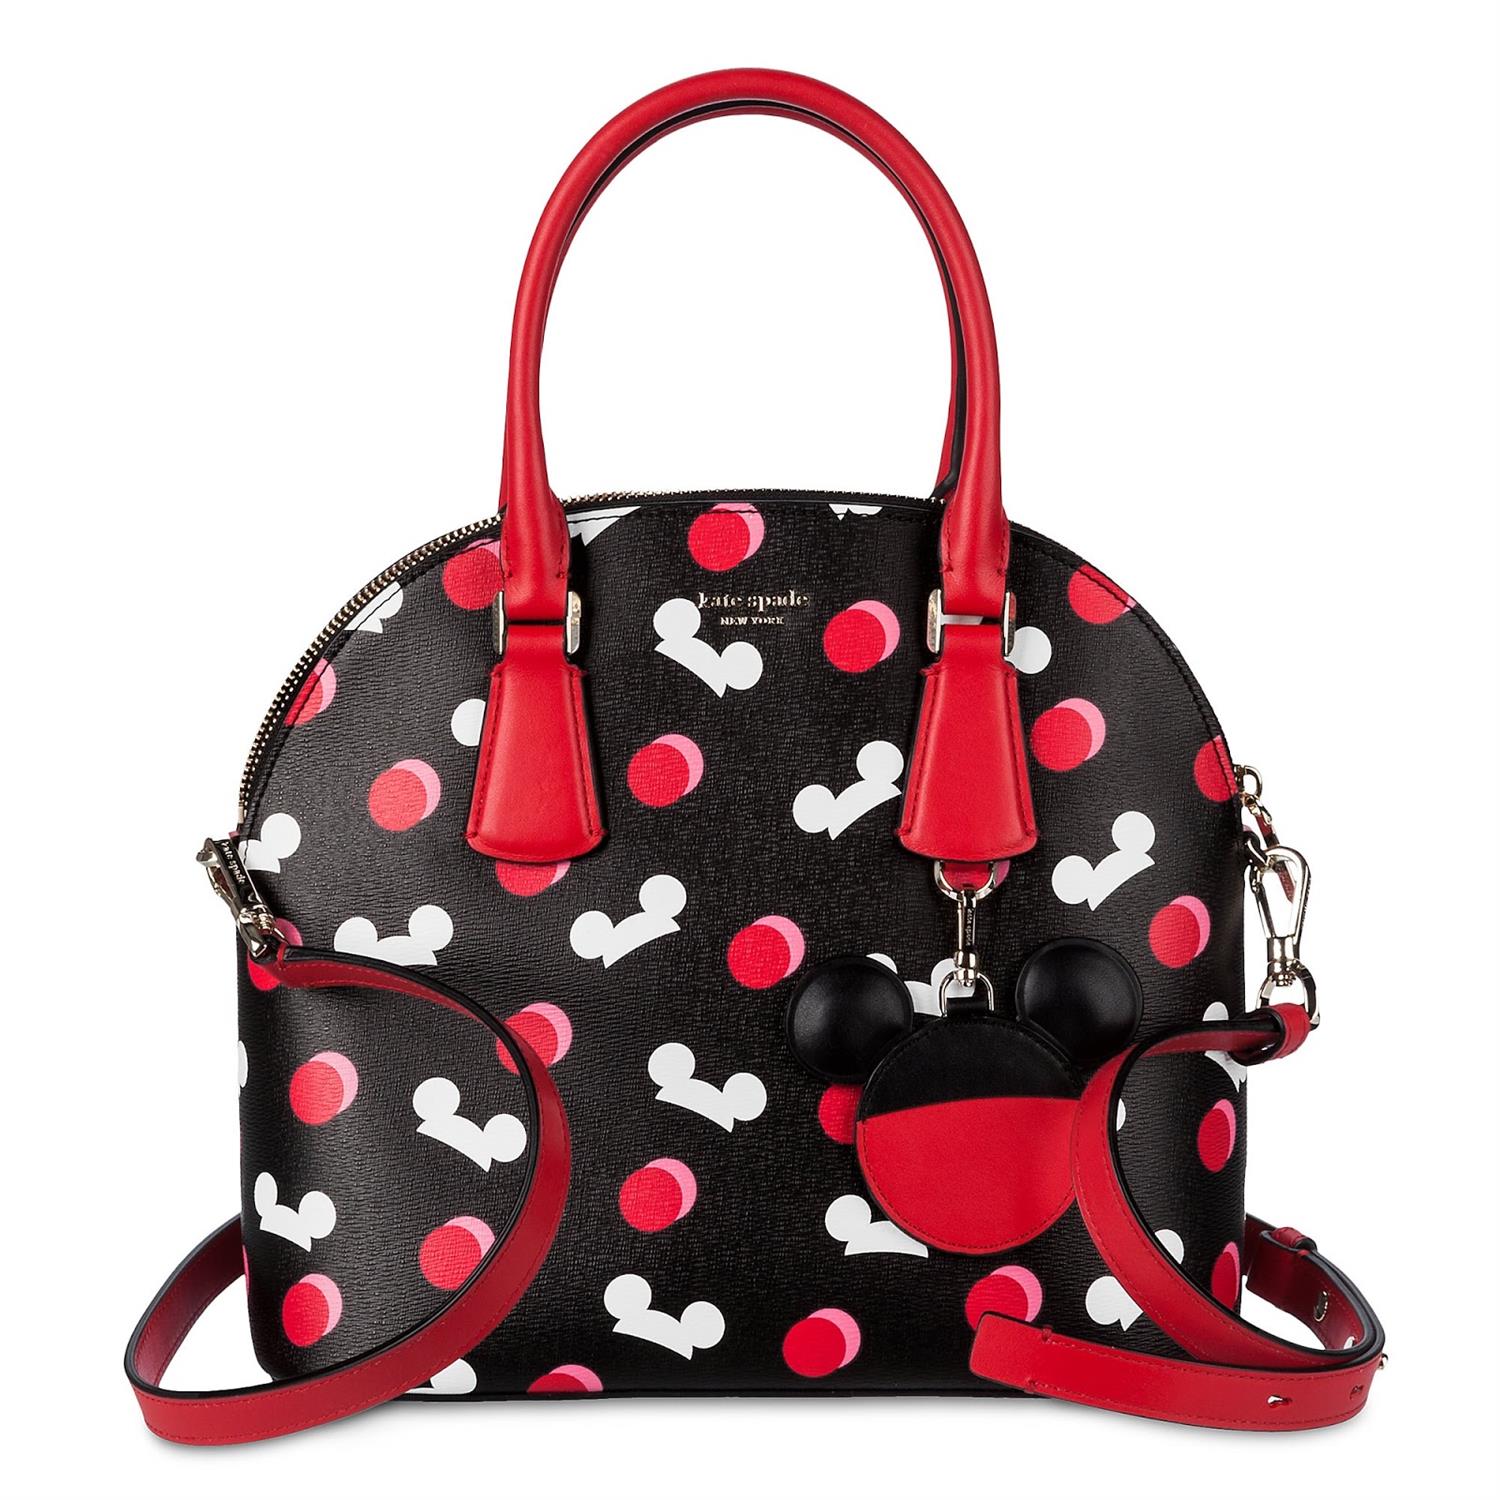 Surprise Mom with Kate Spade, Vera Bradley Bags and Totes from shopDisney